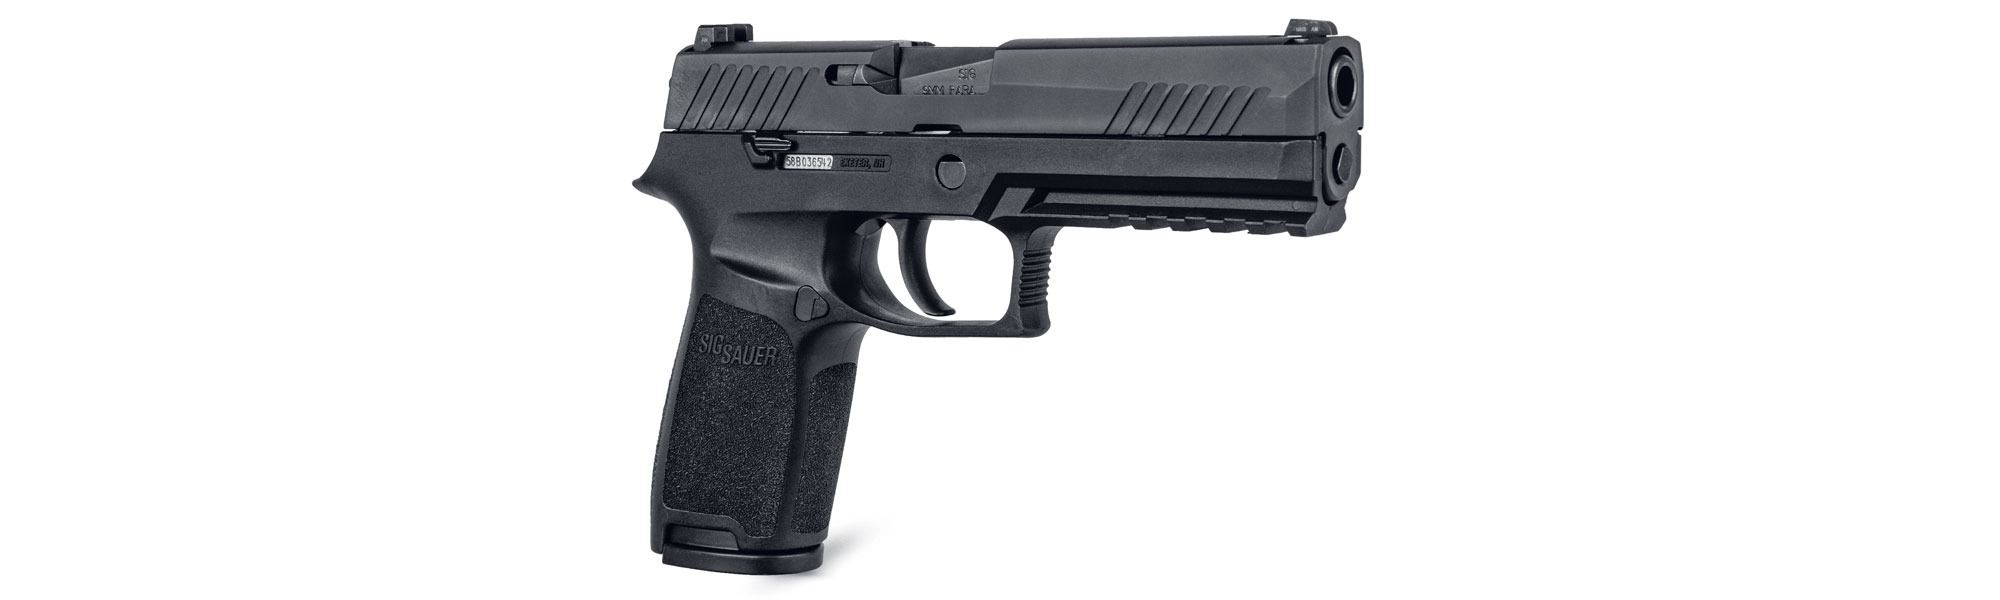 The P320 pistol is featured.